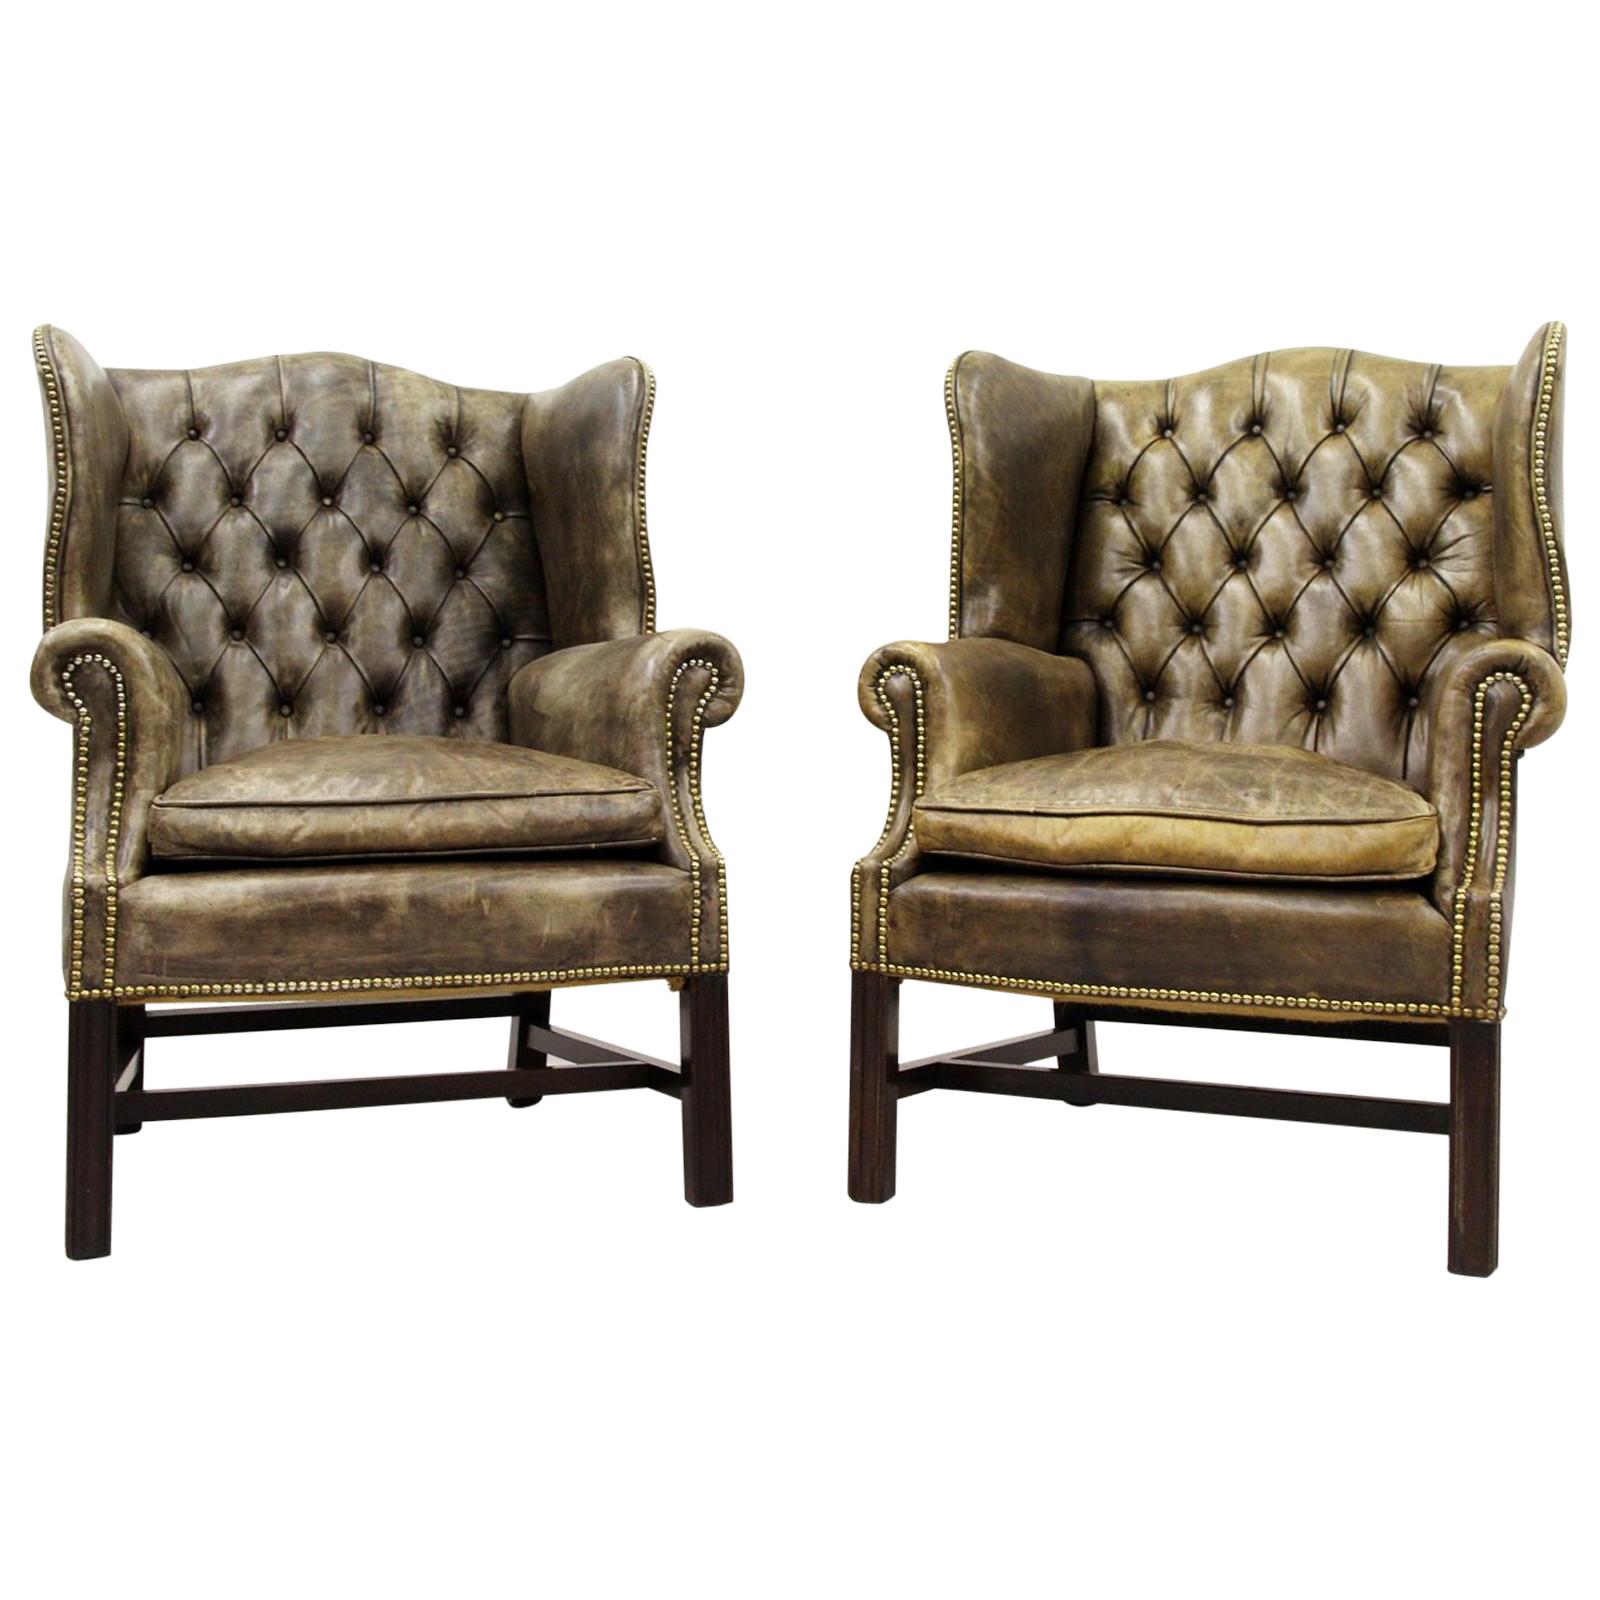 2 Chesterfield Armchair Armchair Wing Chair Antique Chair For Sale